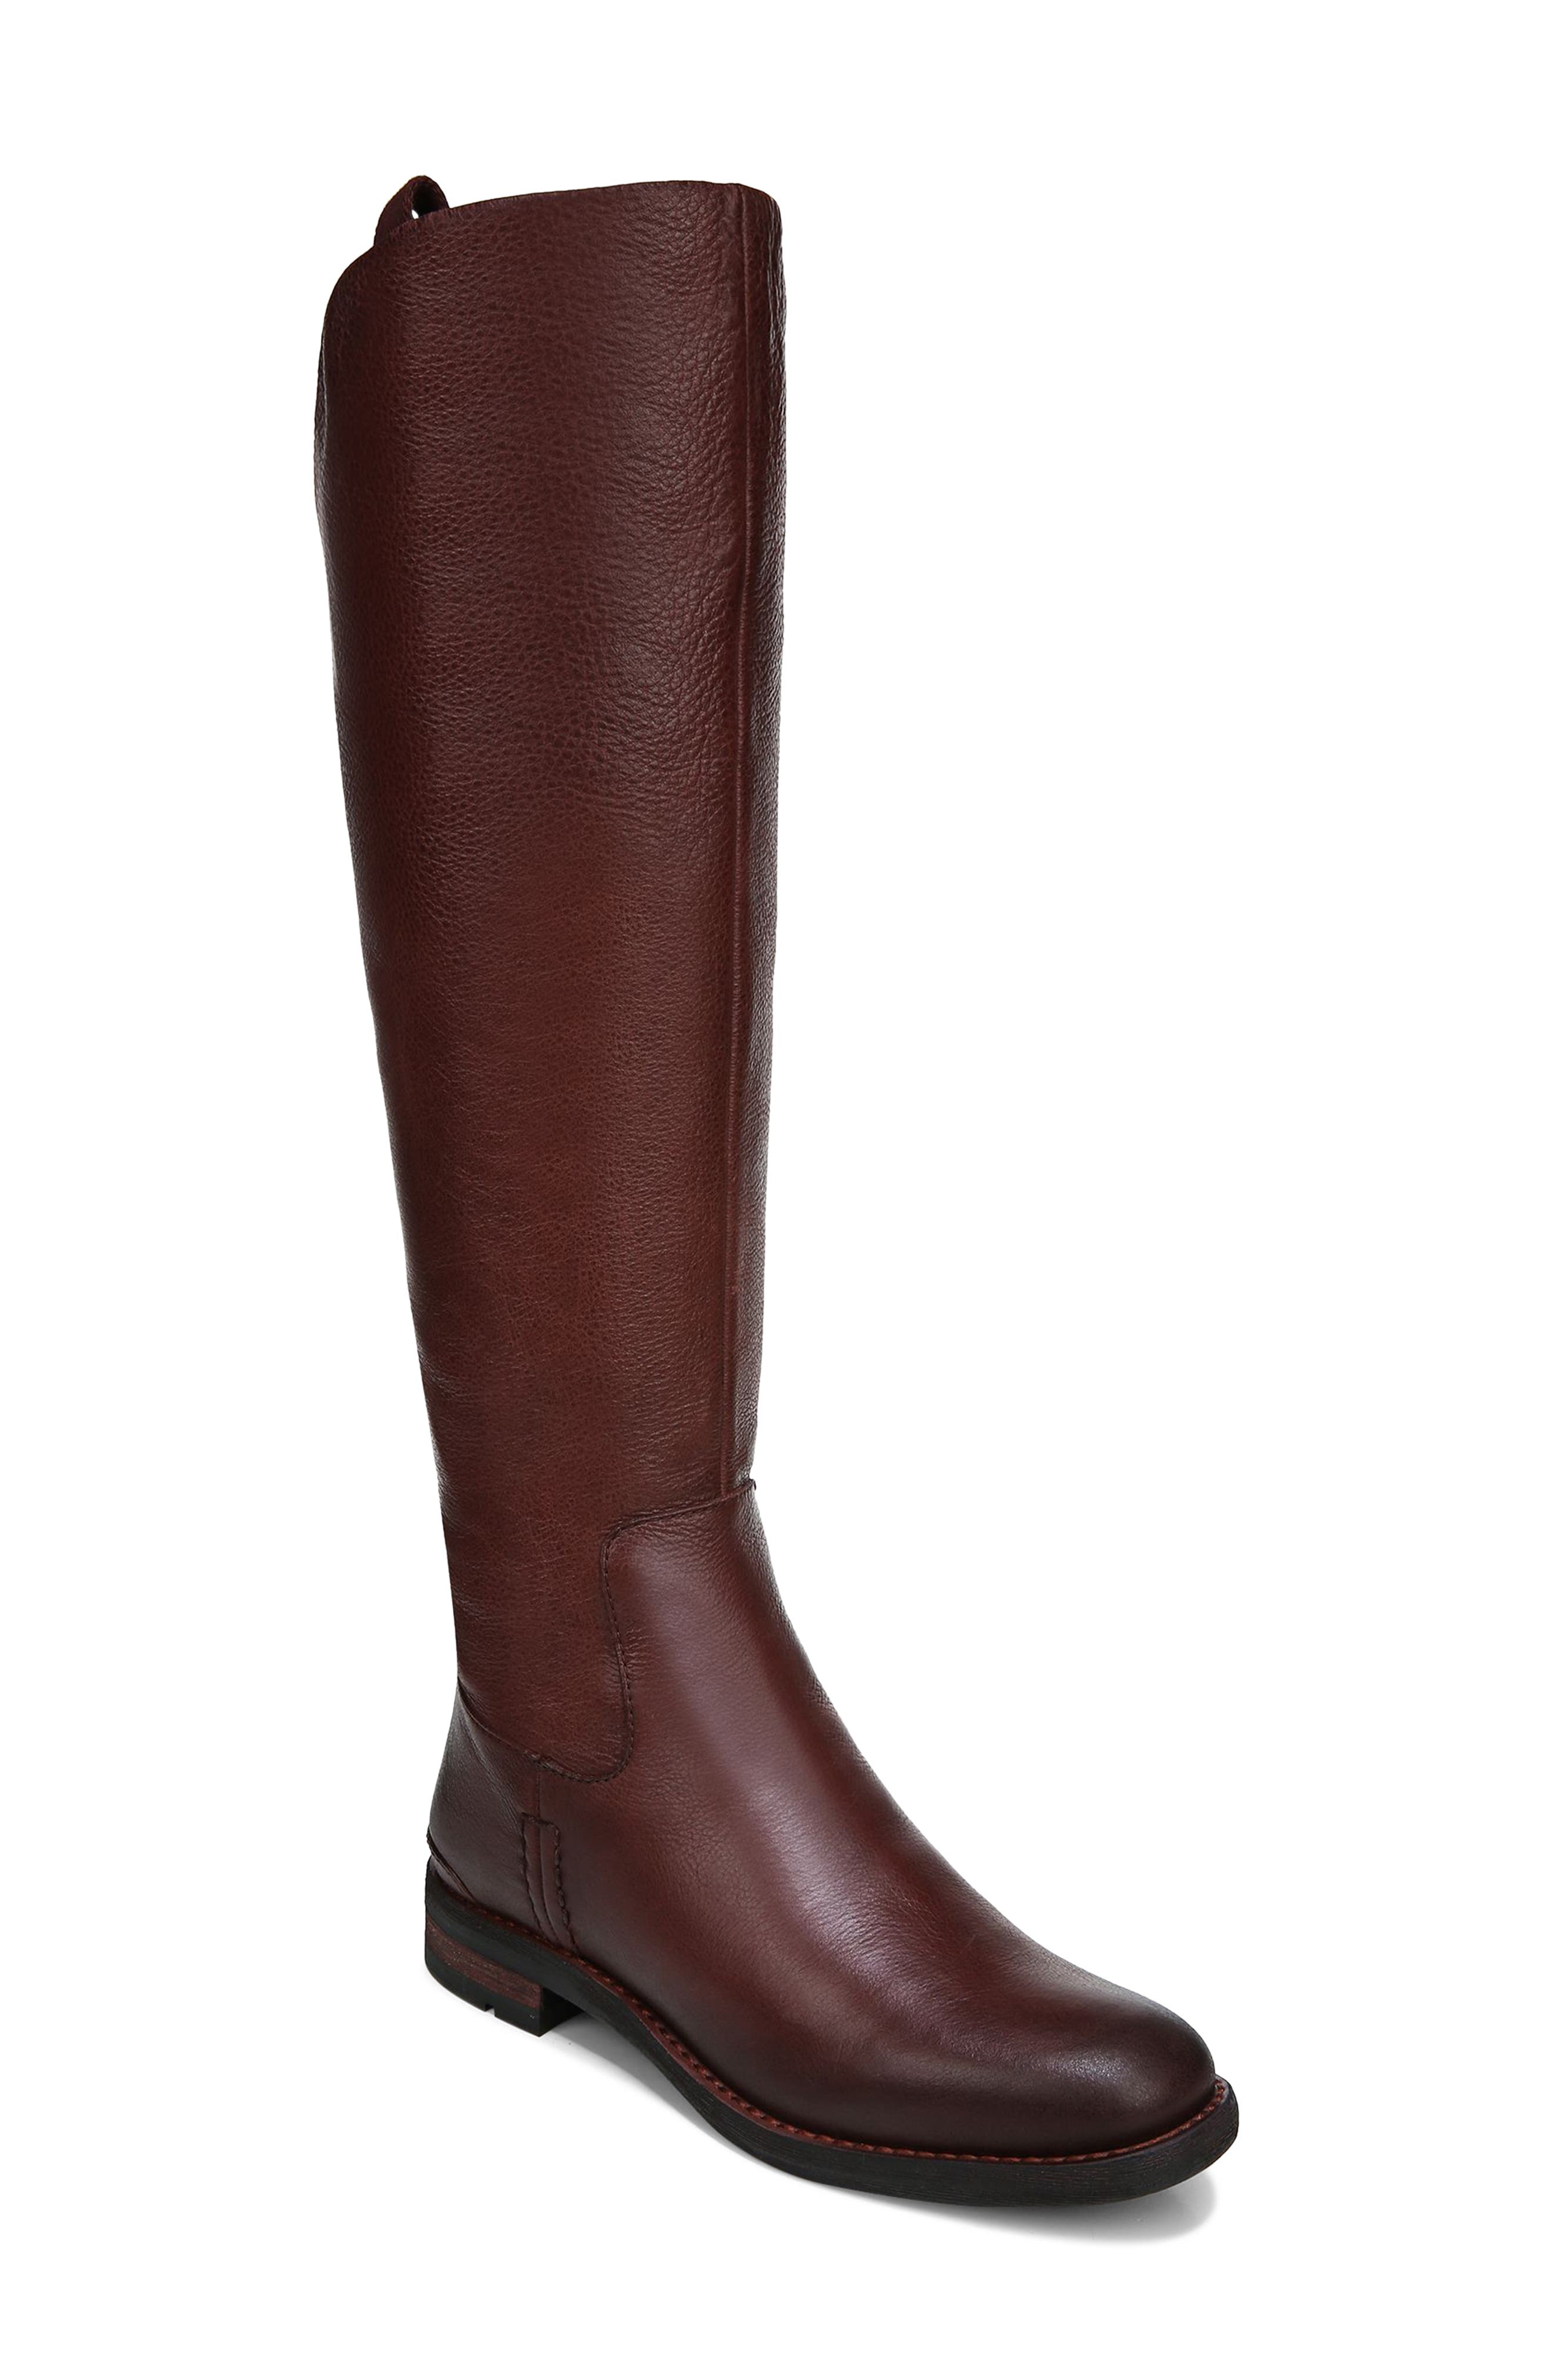 wine colored tall boots